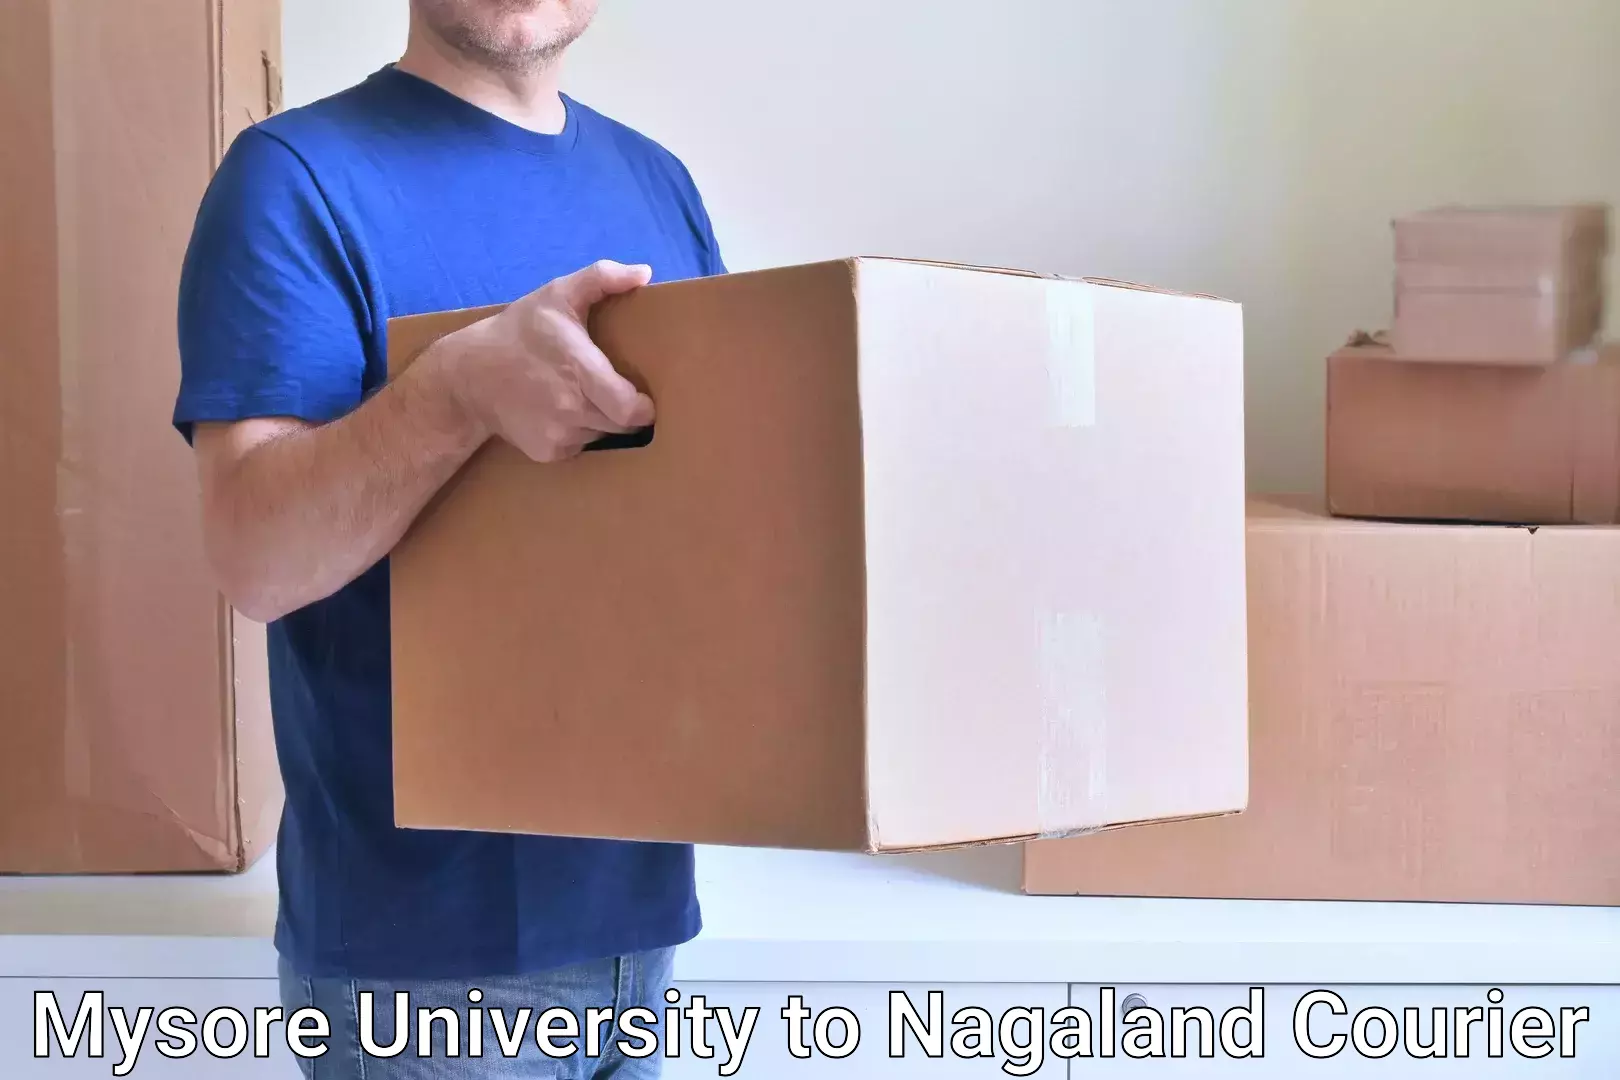 Tailored shipping services Mysore University to Nagaland